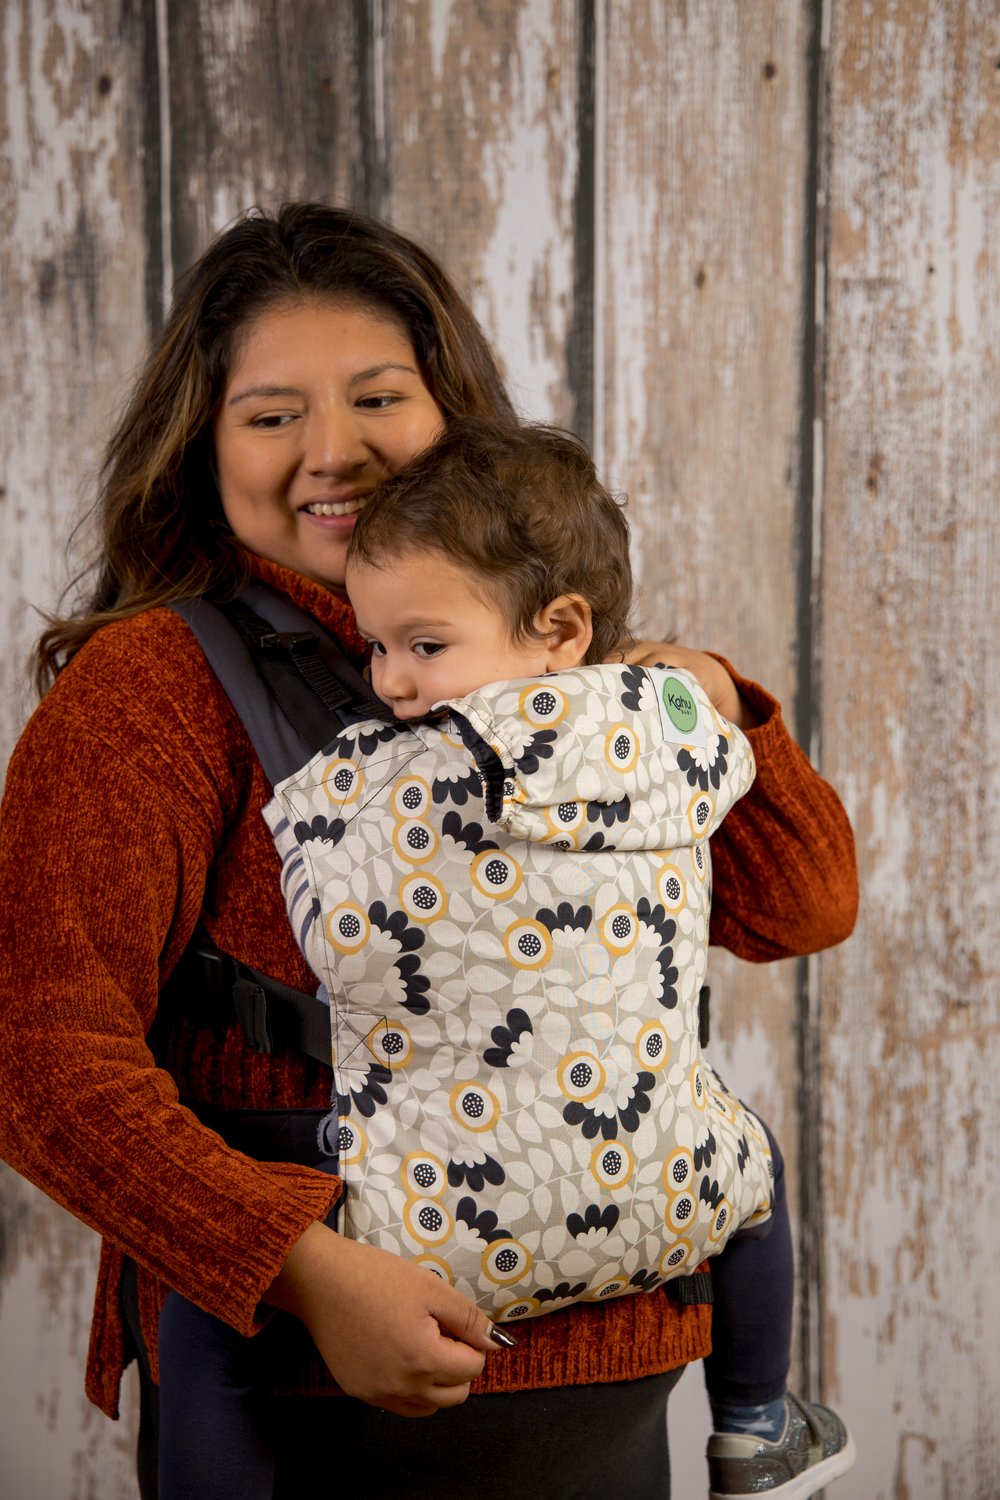 Buy your TwinGo Carrier twin baby carrier from Koala Slings, with FAST, free UK shipping.